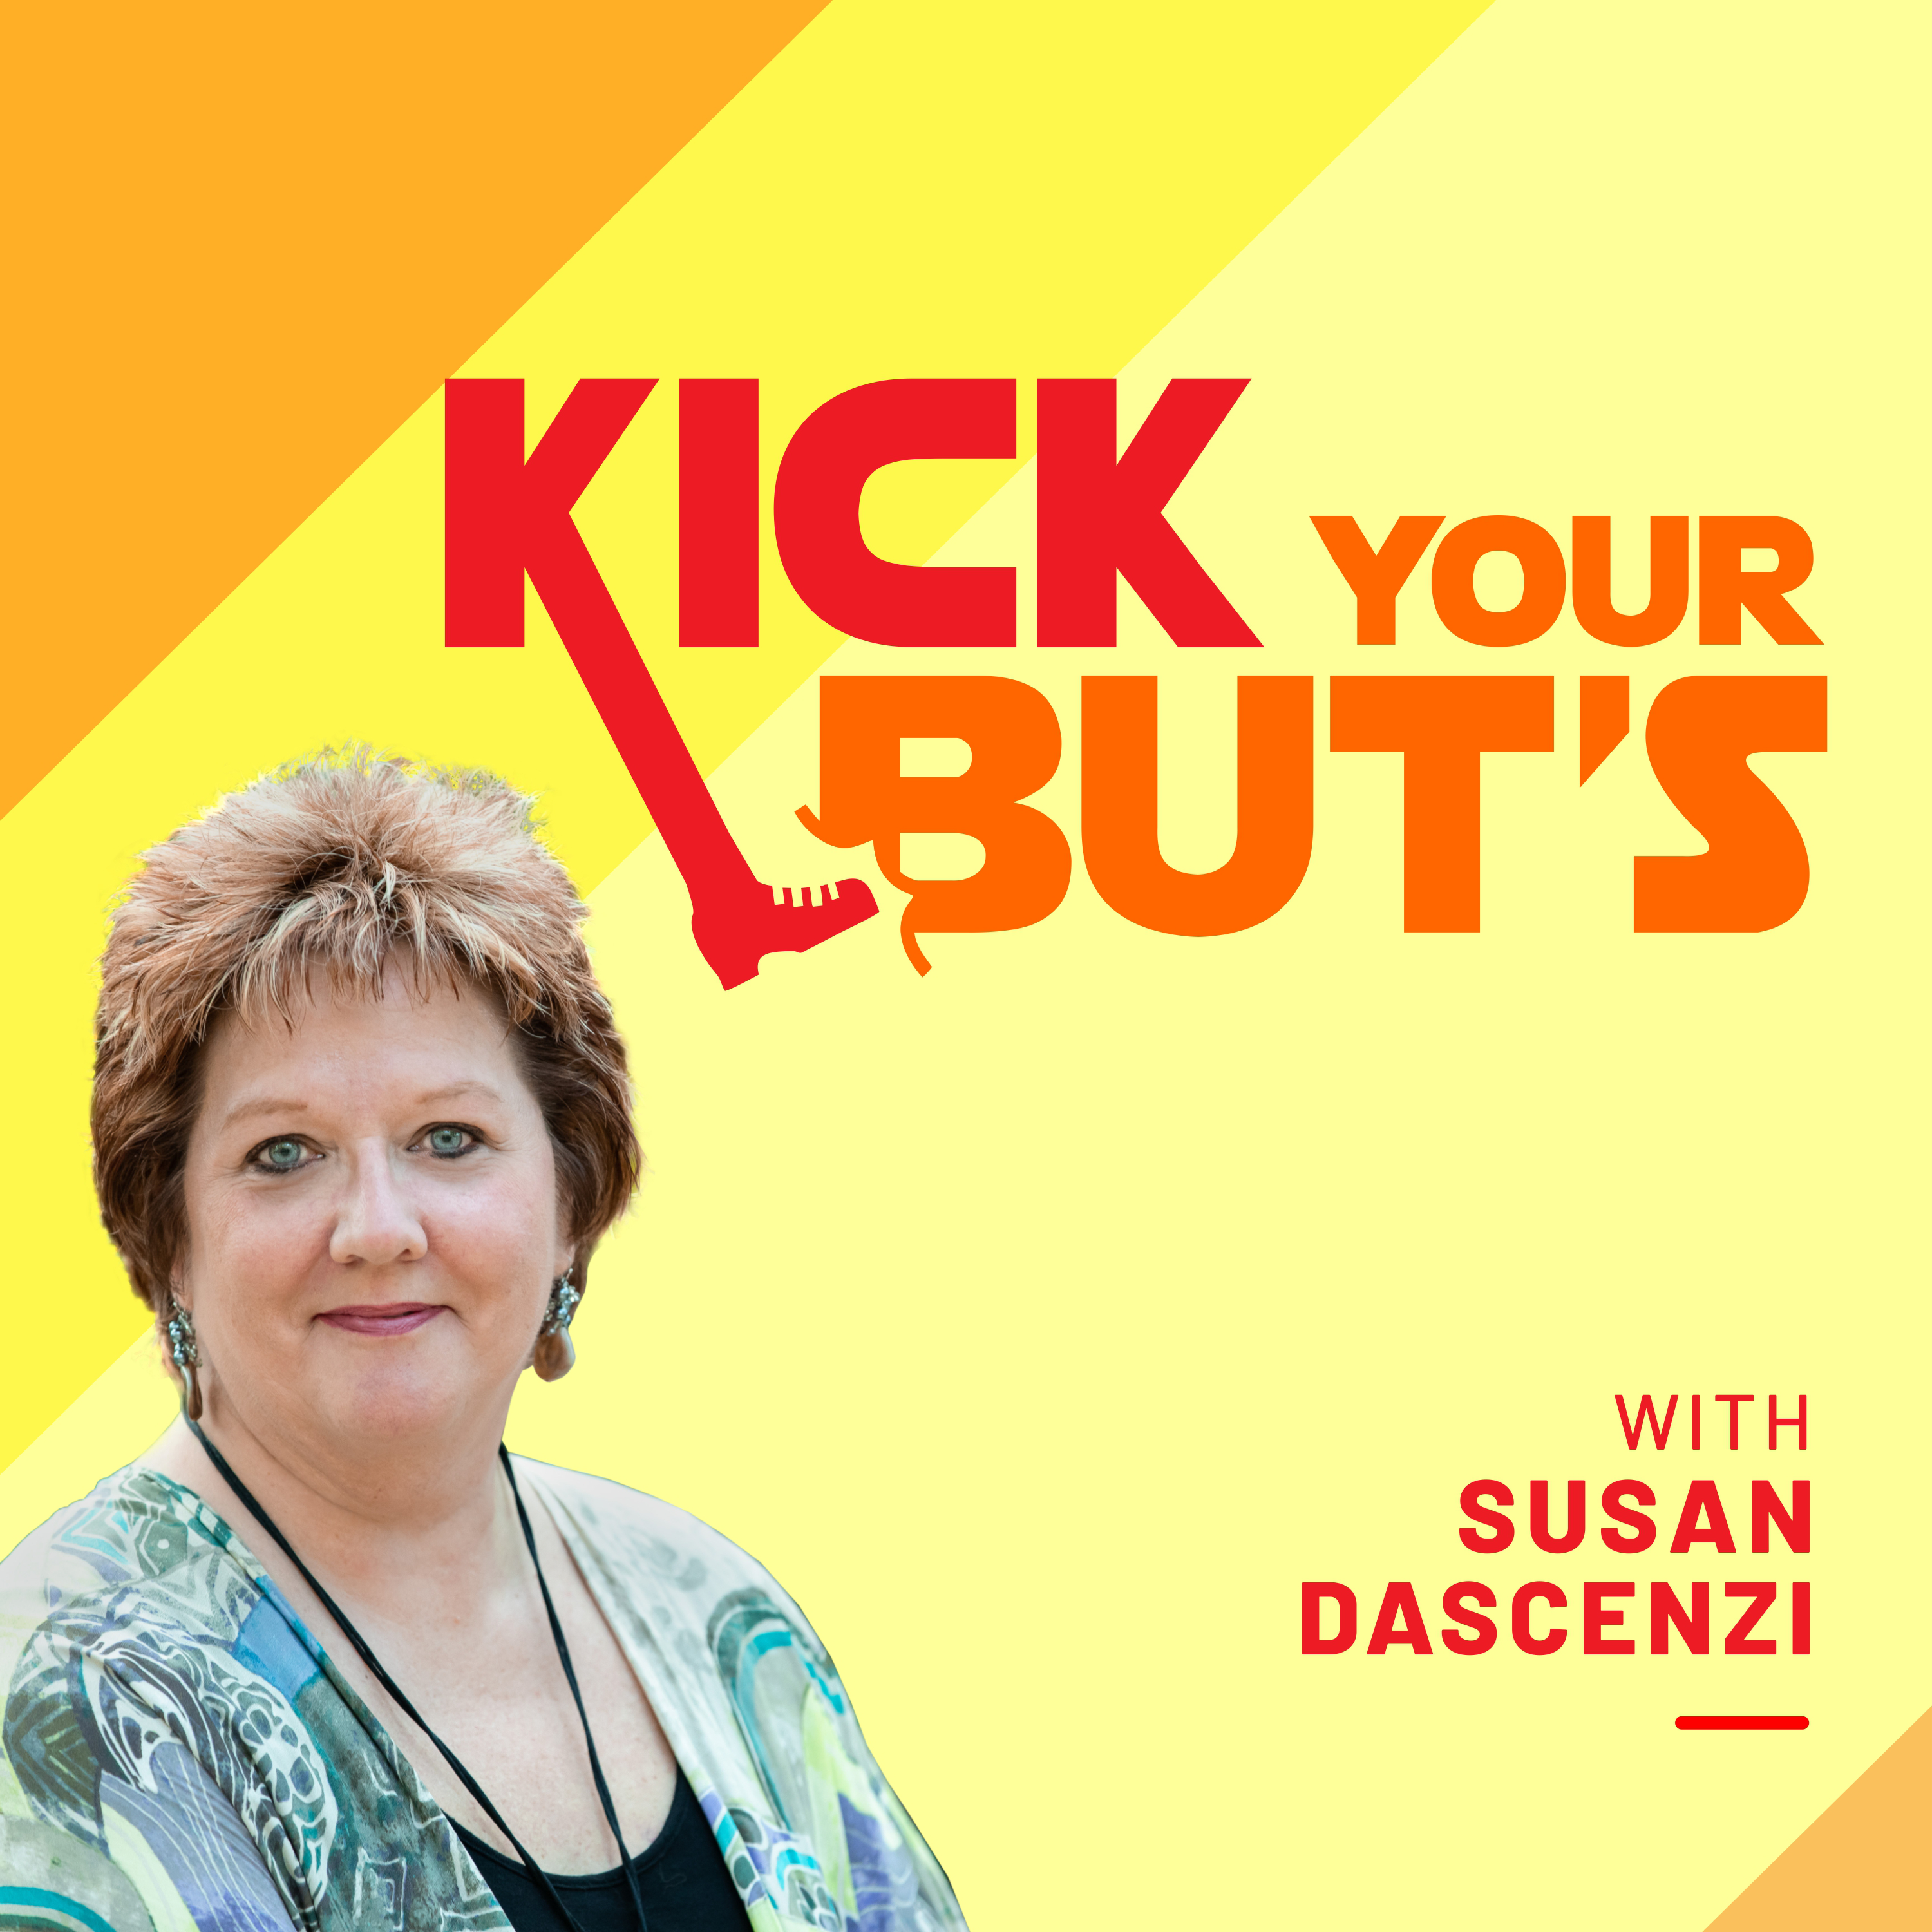 Kick Your But's Podcast with Susan Dascenzi